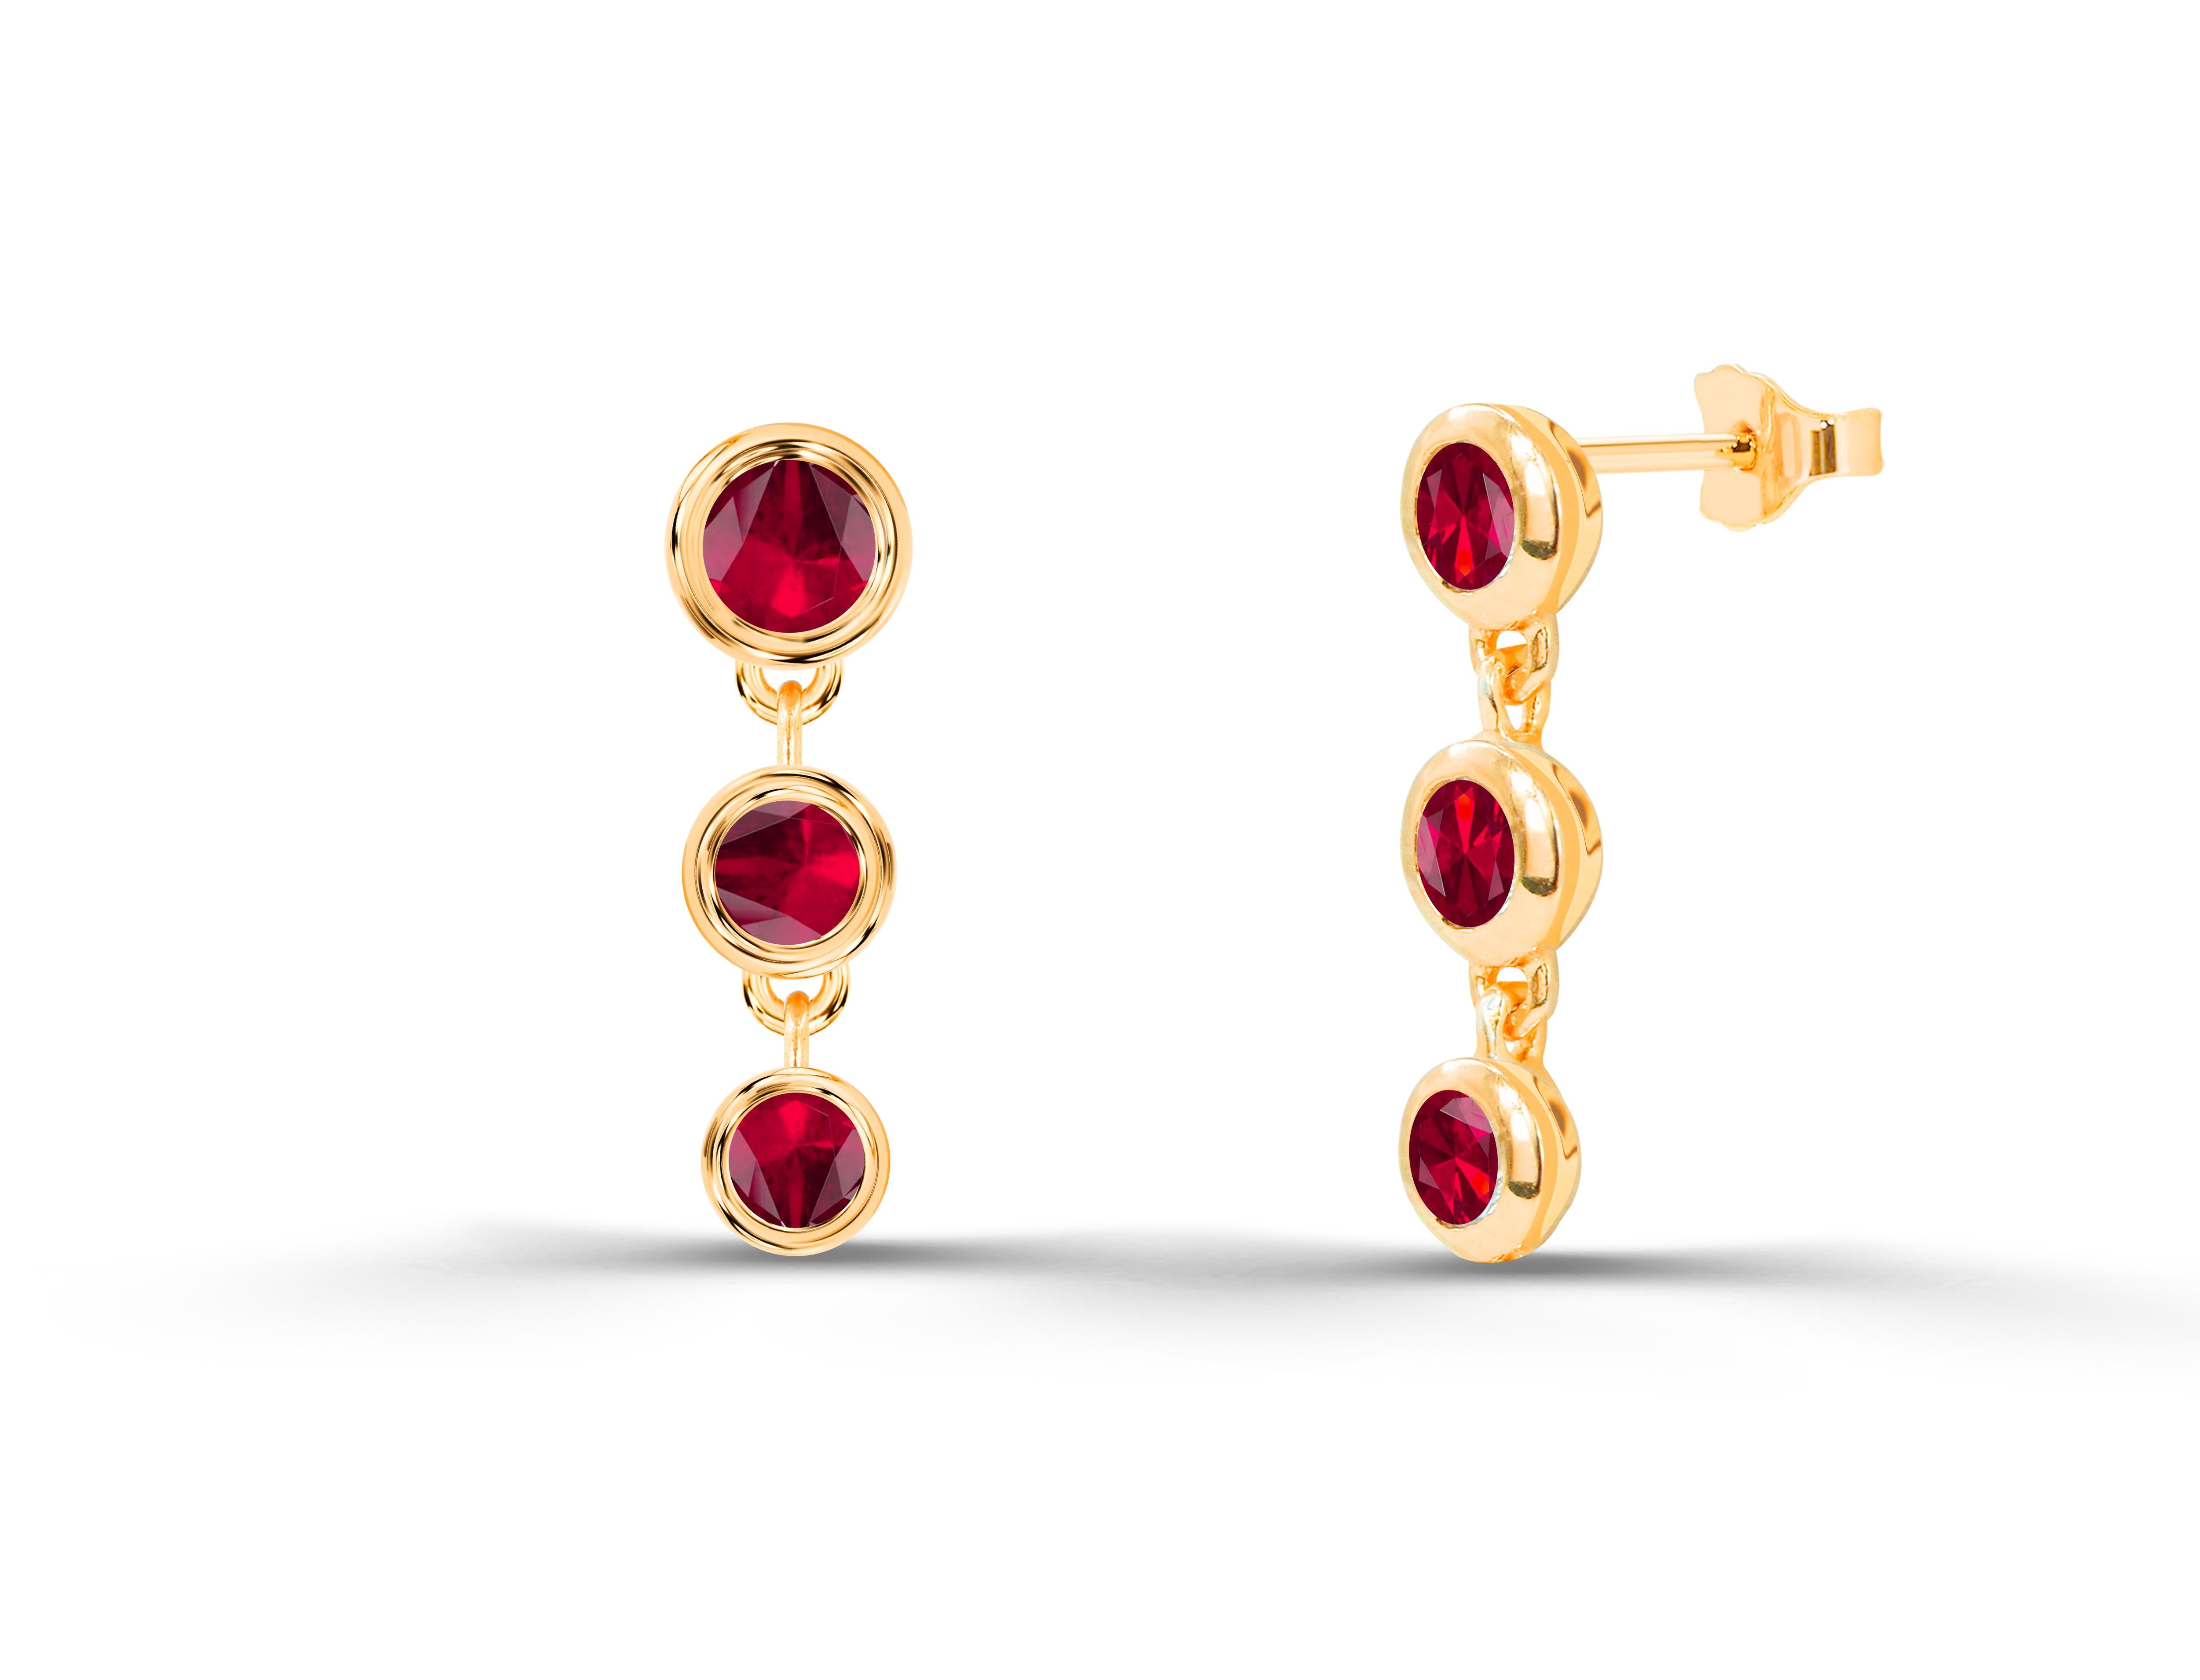 Modern 0.26ct Emerald Ruby and Sapphire Bezel Studs Earrings in 14k Gold For Sale